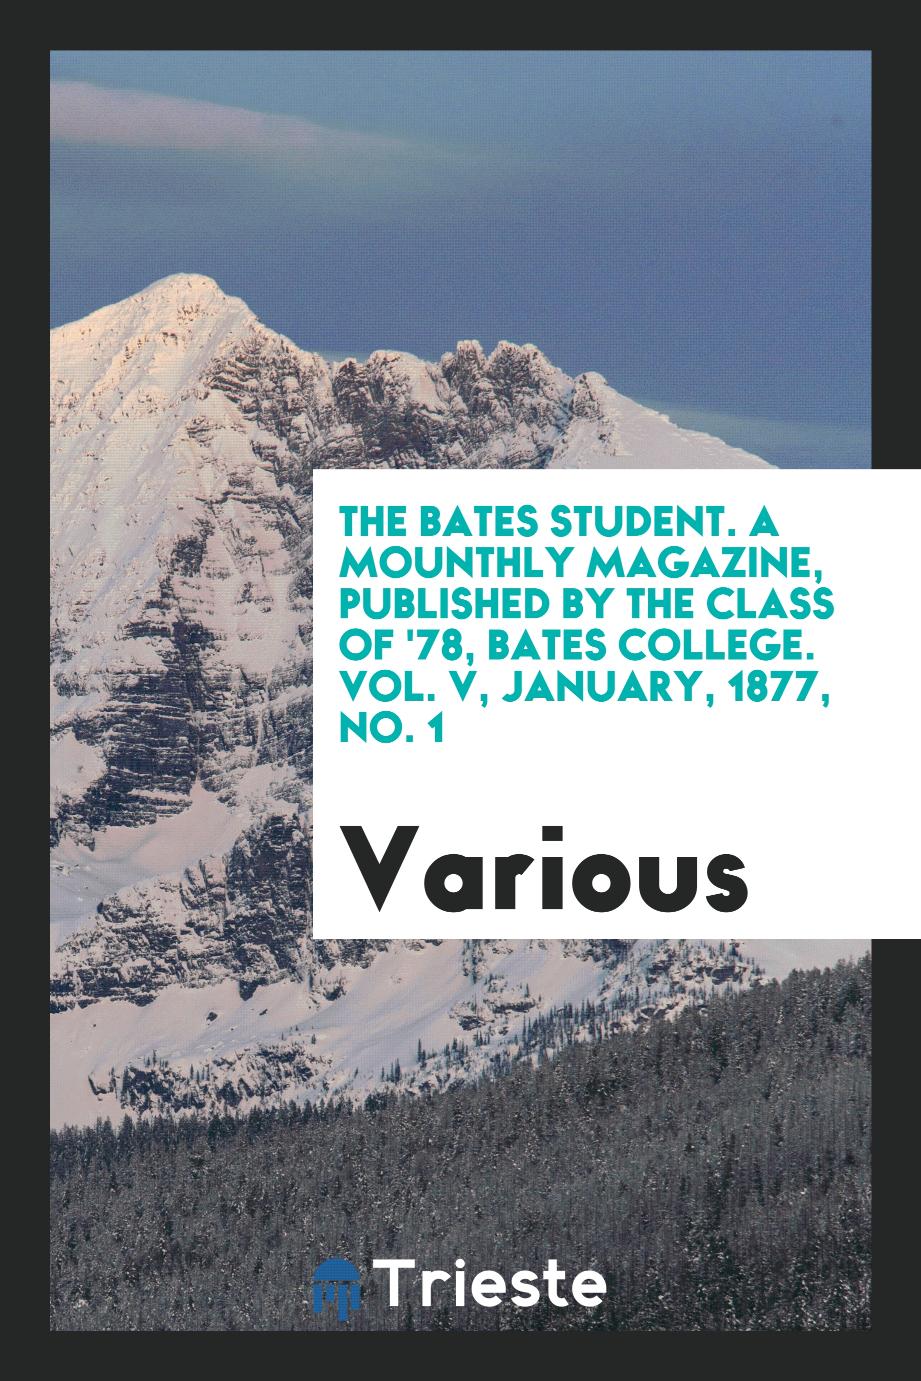 The Bates student. A mounthly magazine, published by the class of '78, Bates college. Vol. V, January, 1877, No. 1